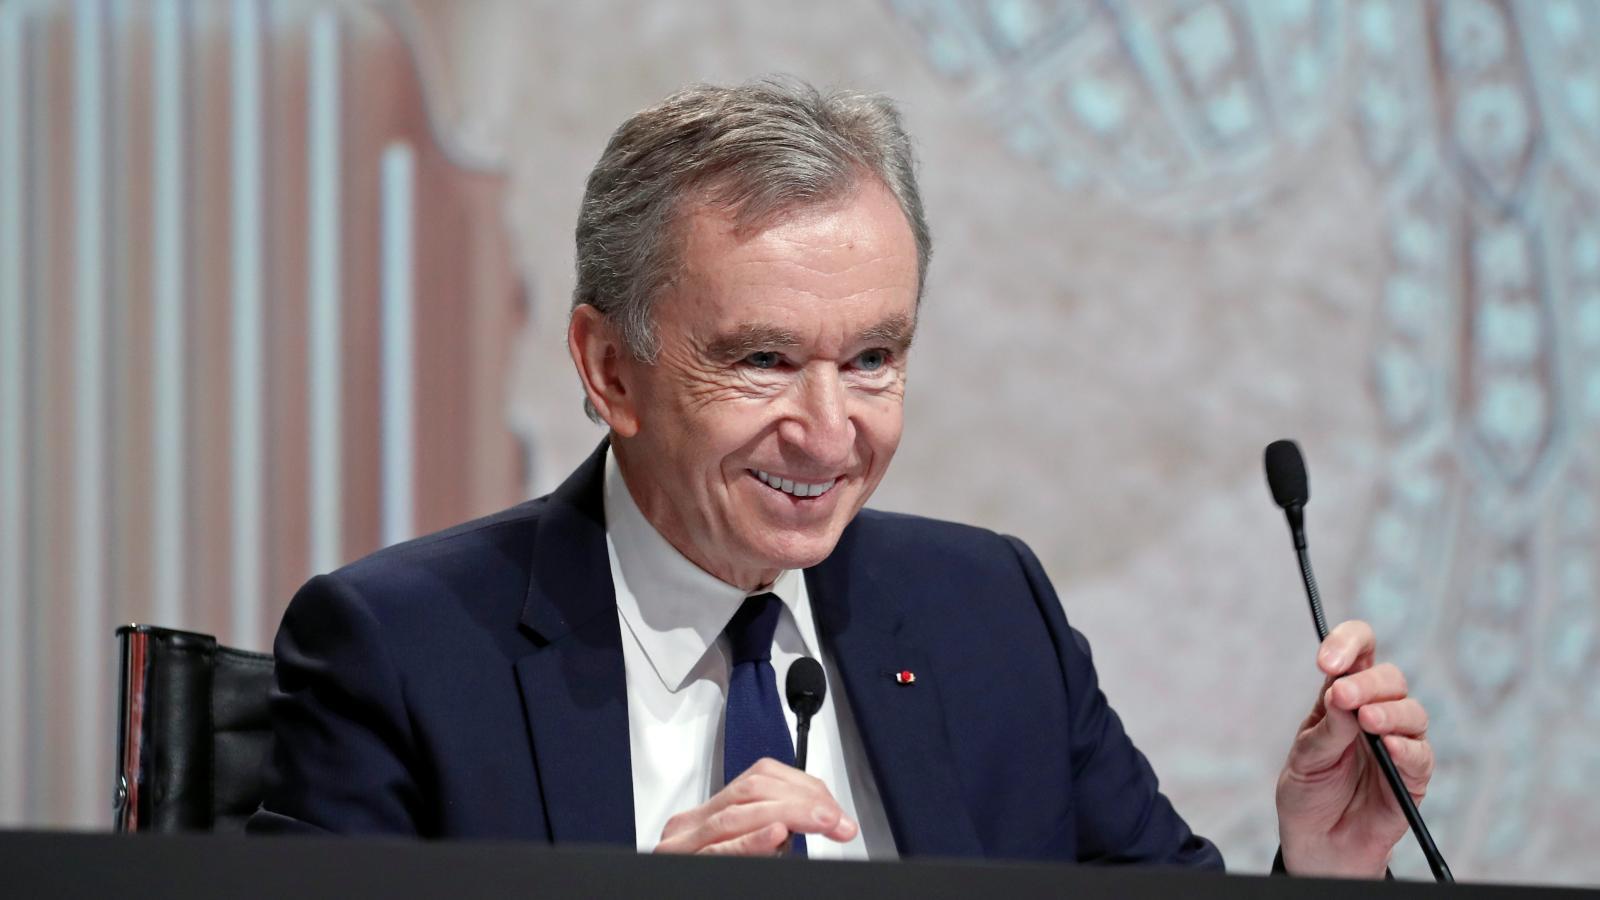 Wolf in cashmere' Bernard Arnault calls off the hunt for shares in